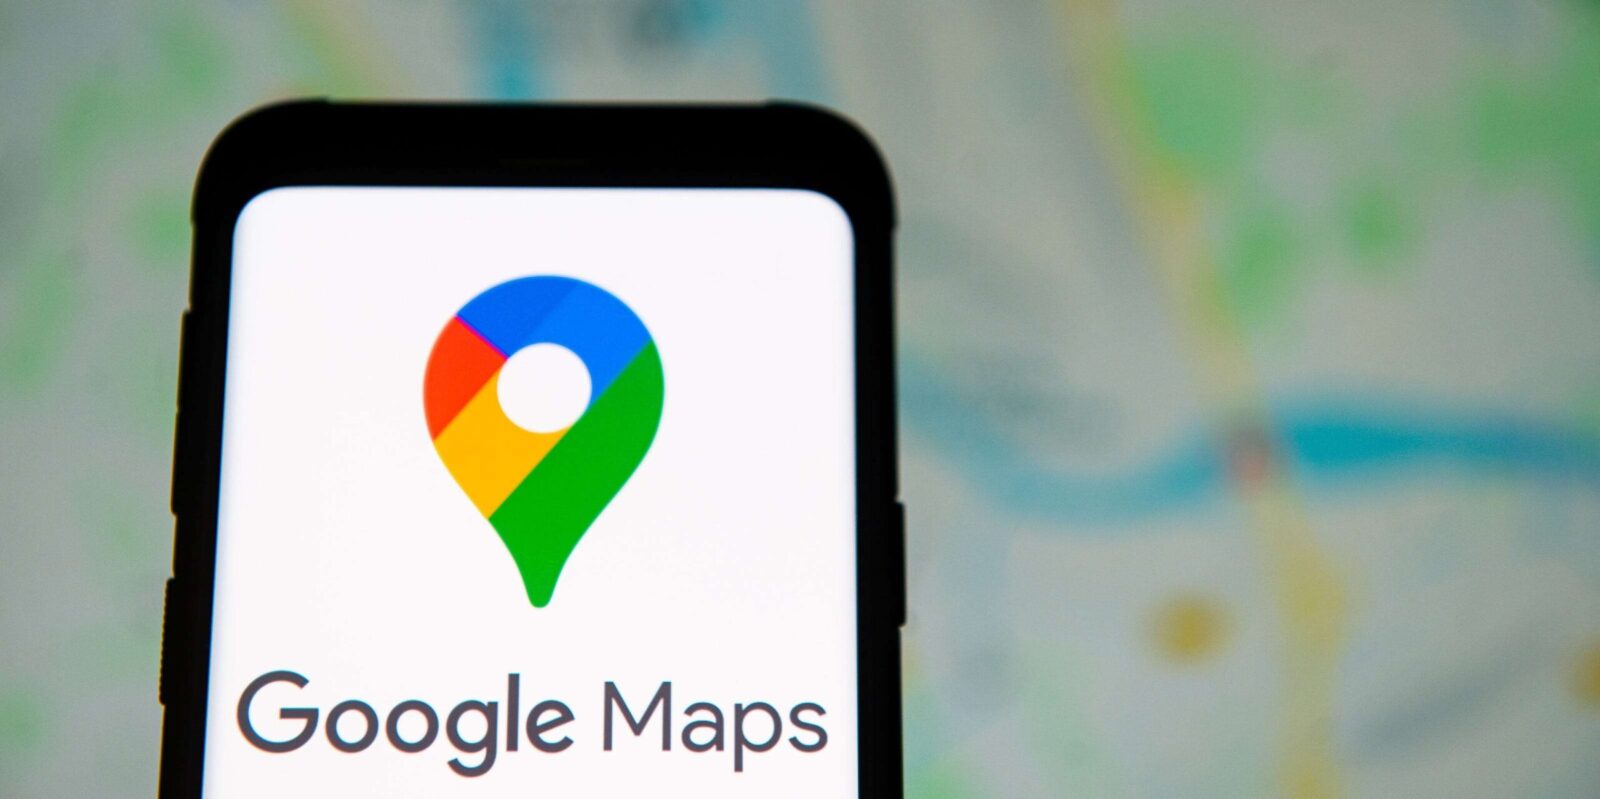 How to Track Someone on Google Maps